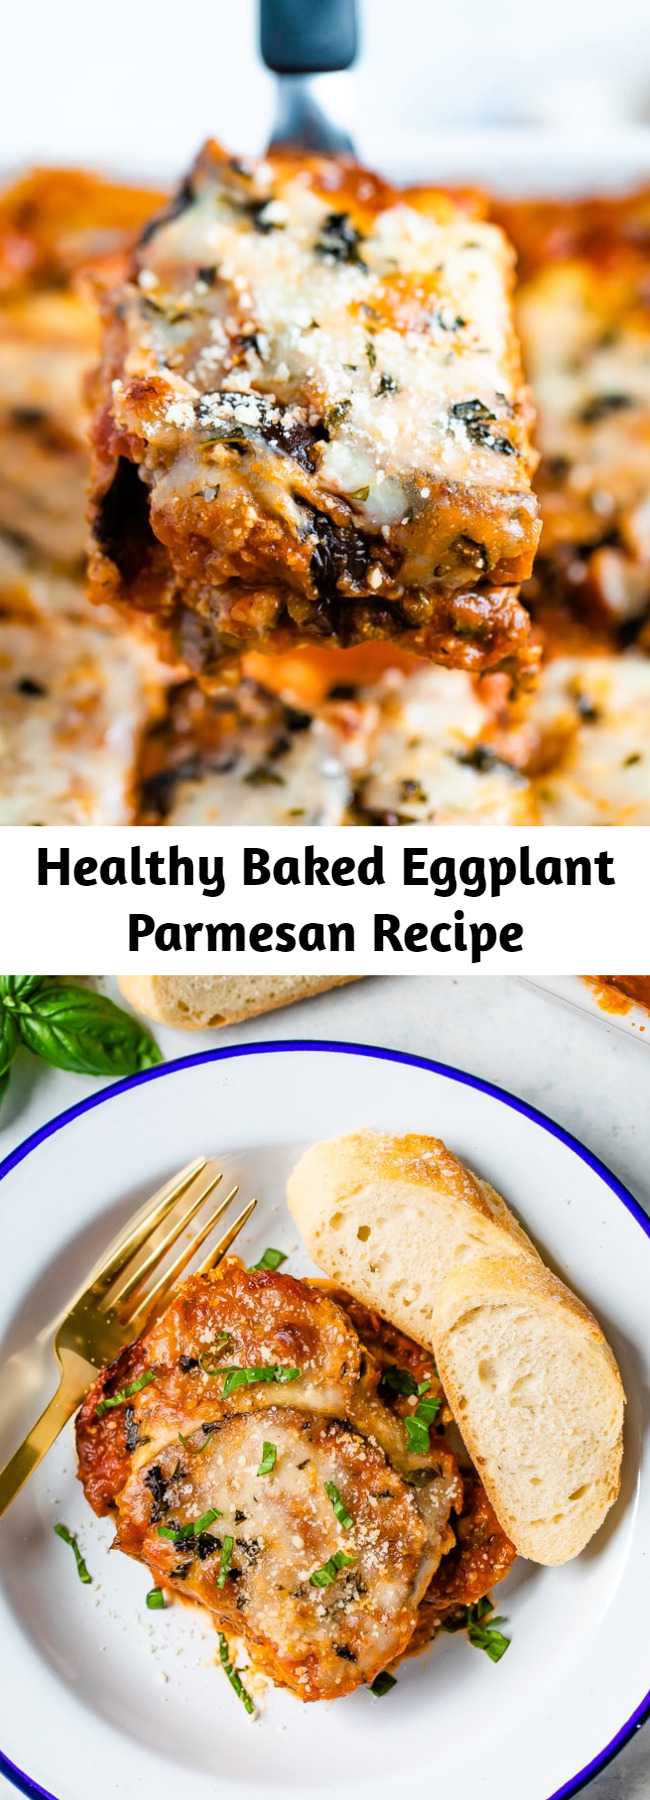 Healthy Baked Eggplant Parmesan Recipe - Make a healthy baked eggplant parmesan with crispy almond flour-coated eggplant slices that are baked — no frying or bread crumbs needed!